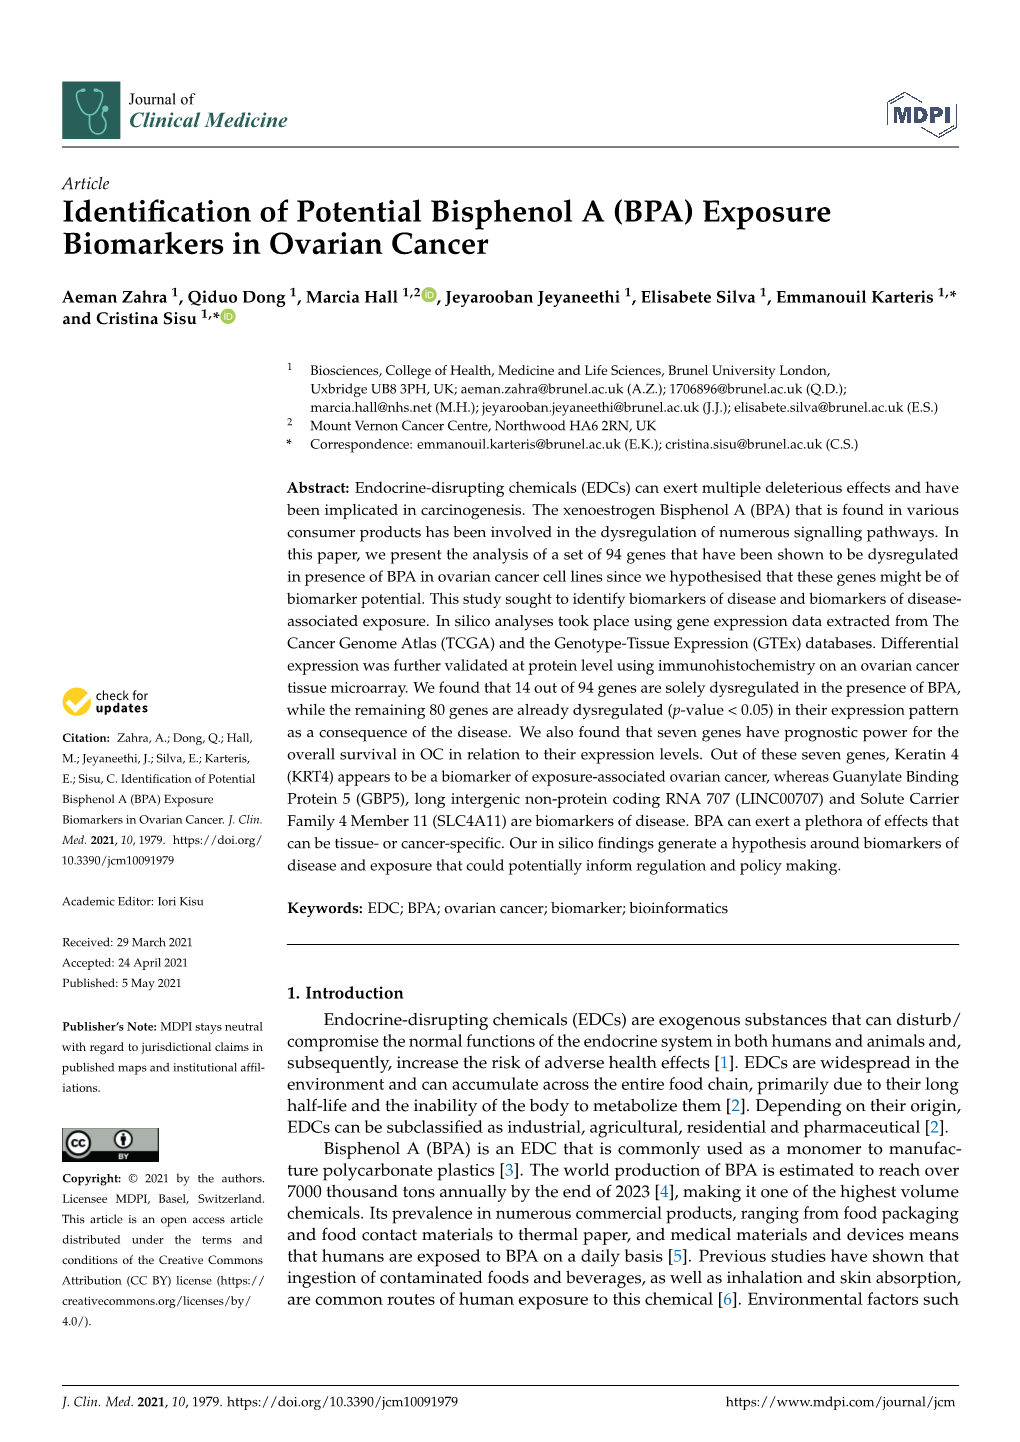 (BPA) Exposure Biomarkers in Ovarian Cancer